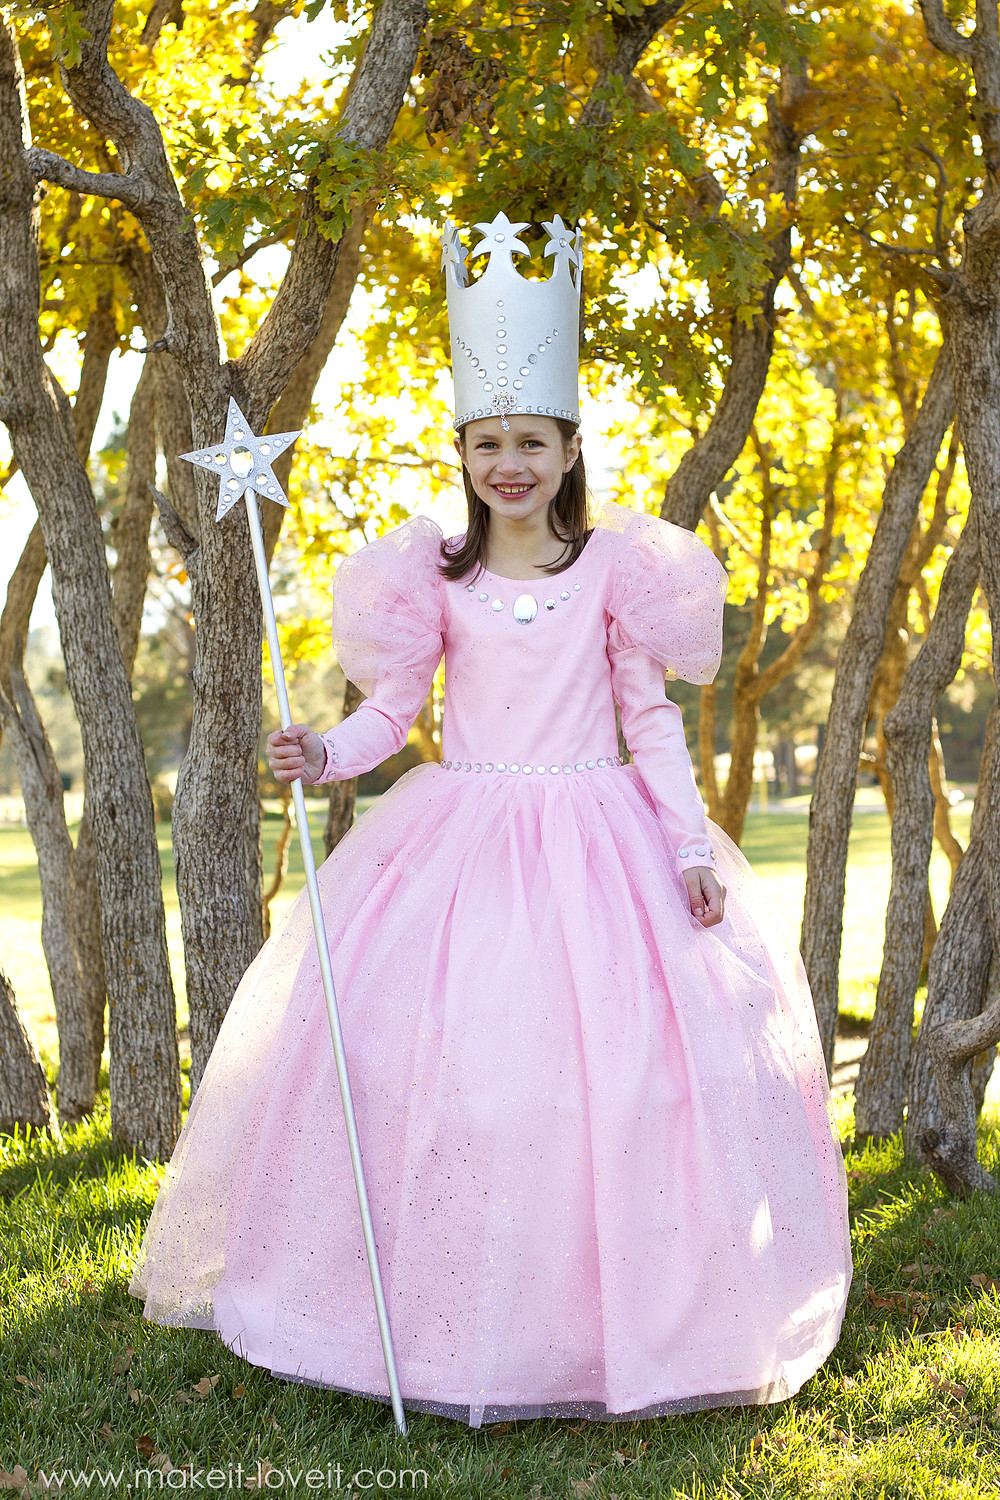 Witch Costume DIY
 Glinda the Good Witch from "Wizard of Oz"